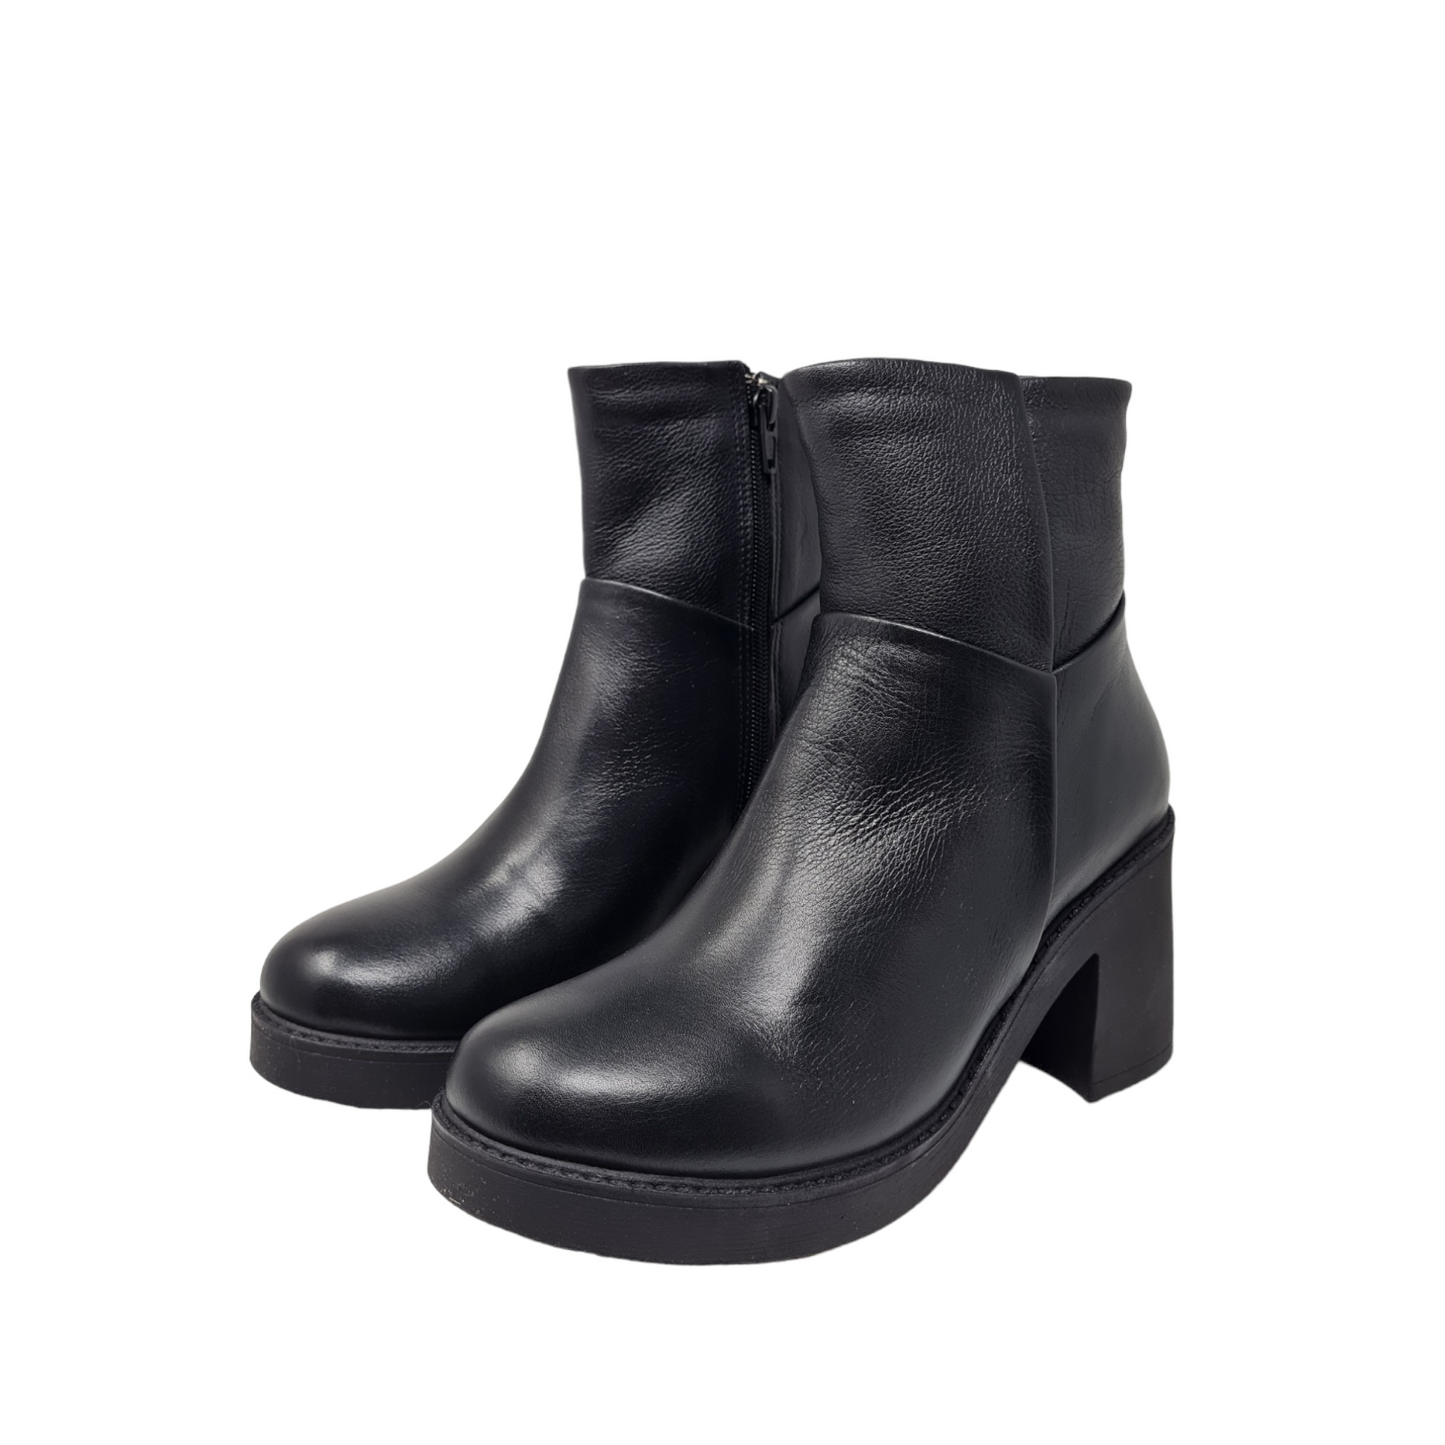 Z7100 ankle boot